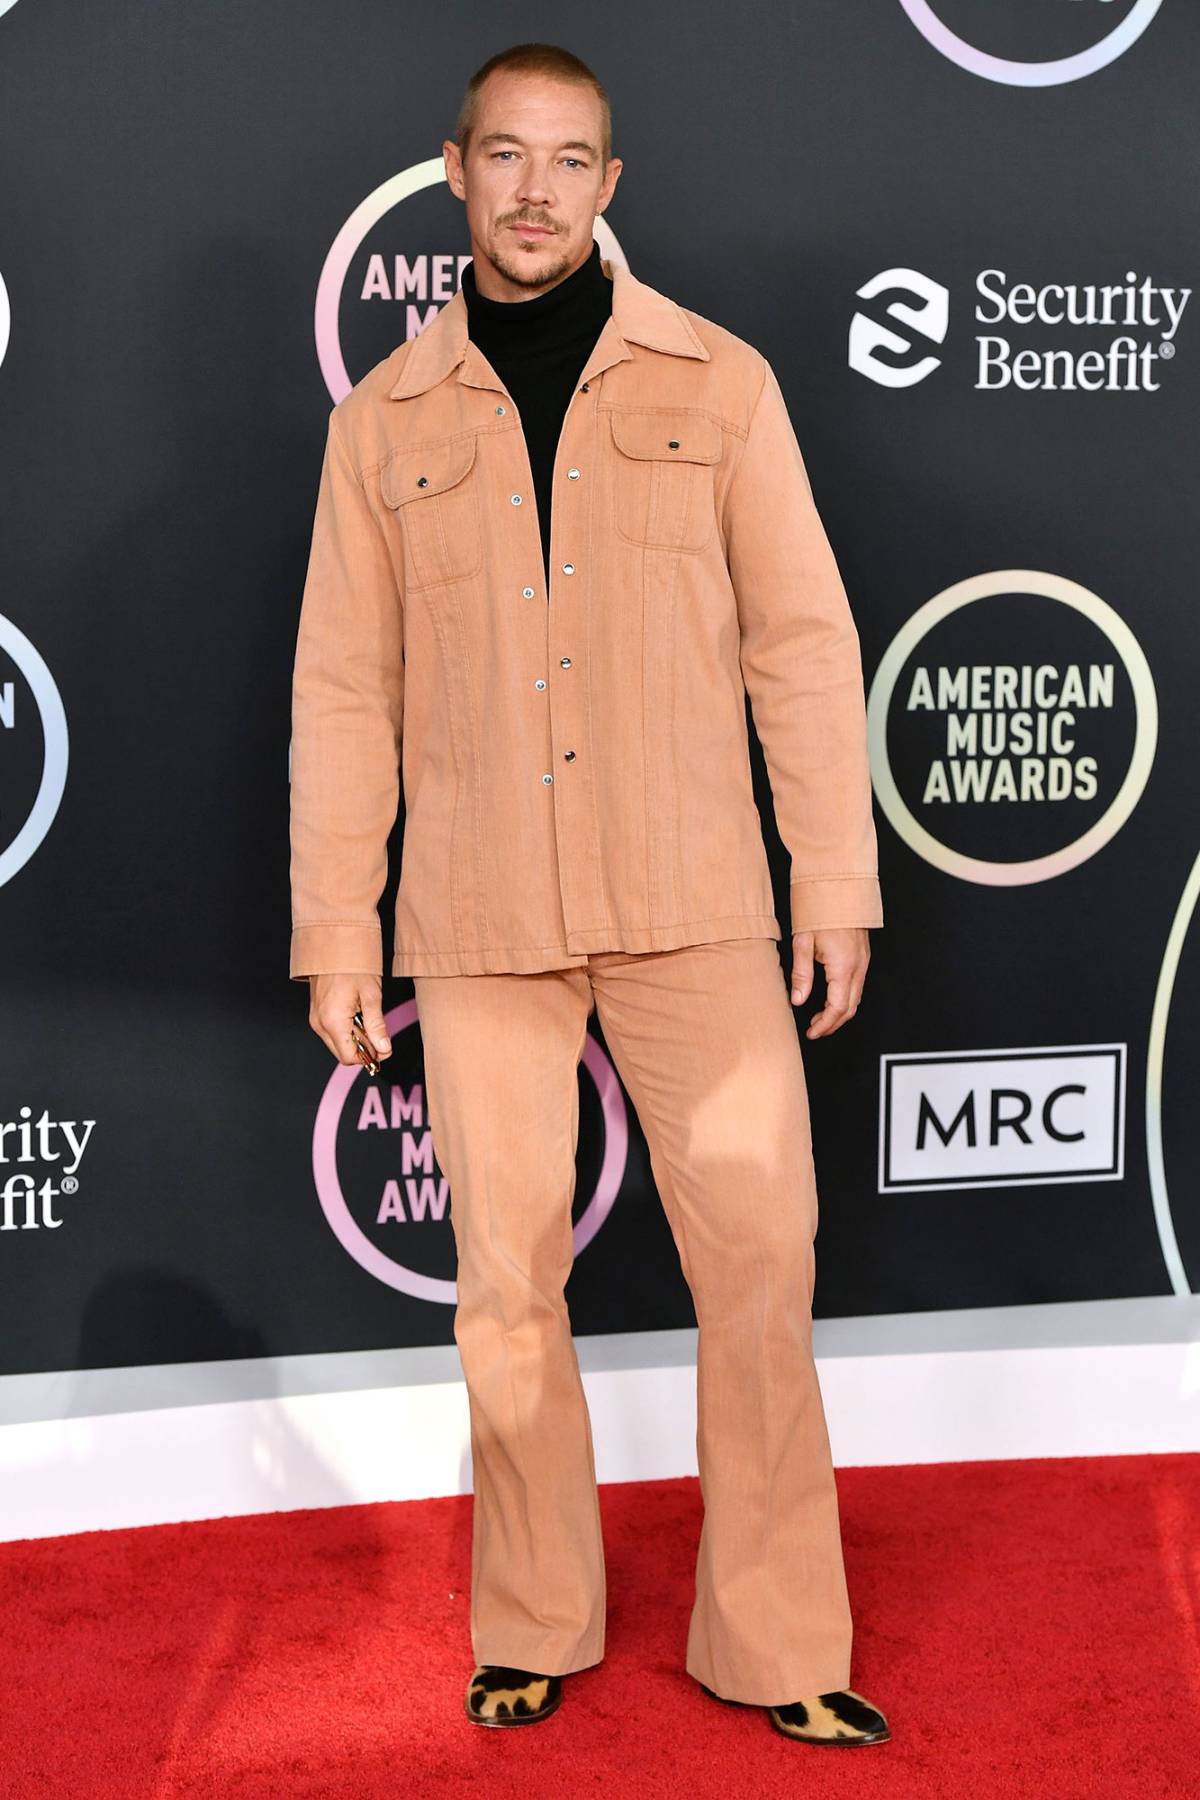 Harper presents award at AMAs in stylish suit